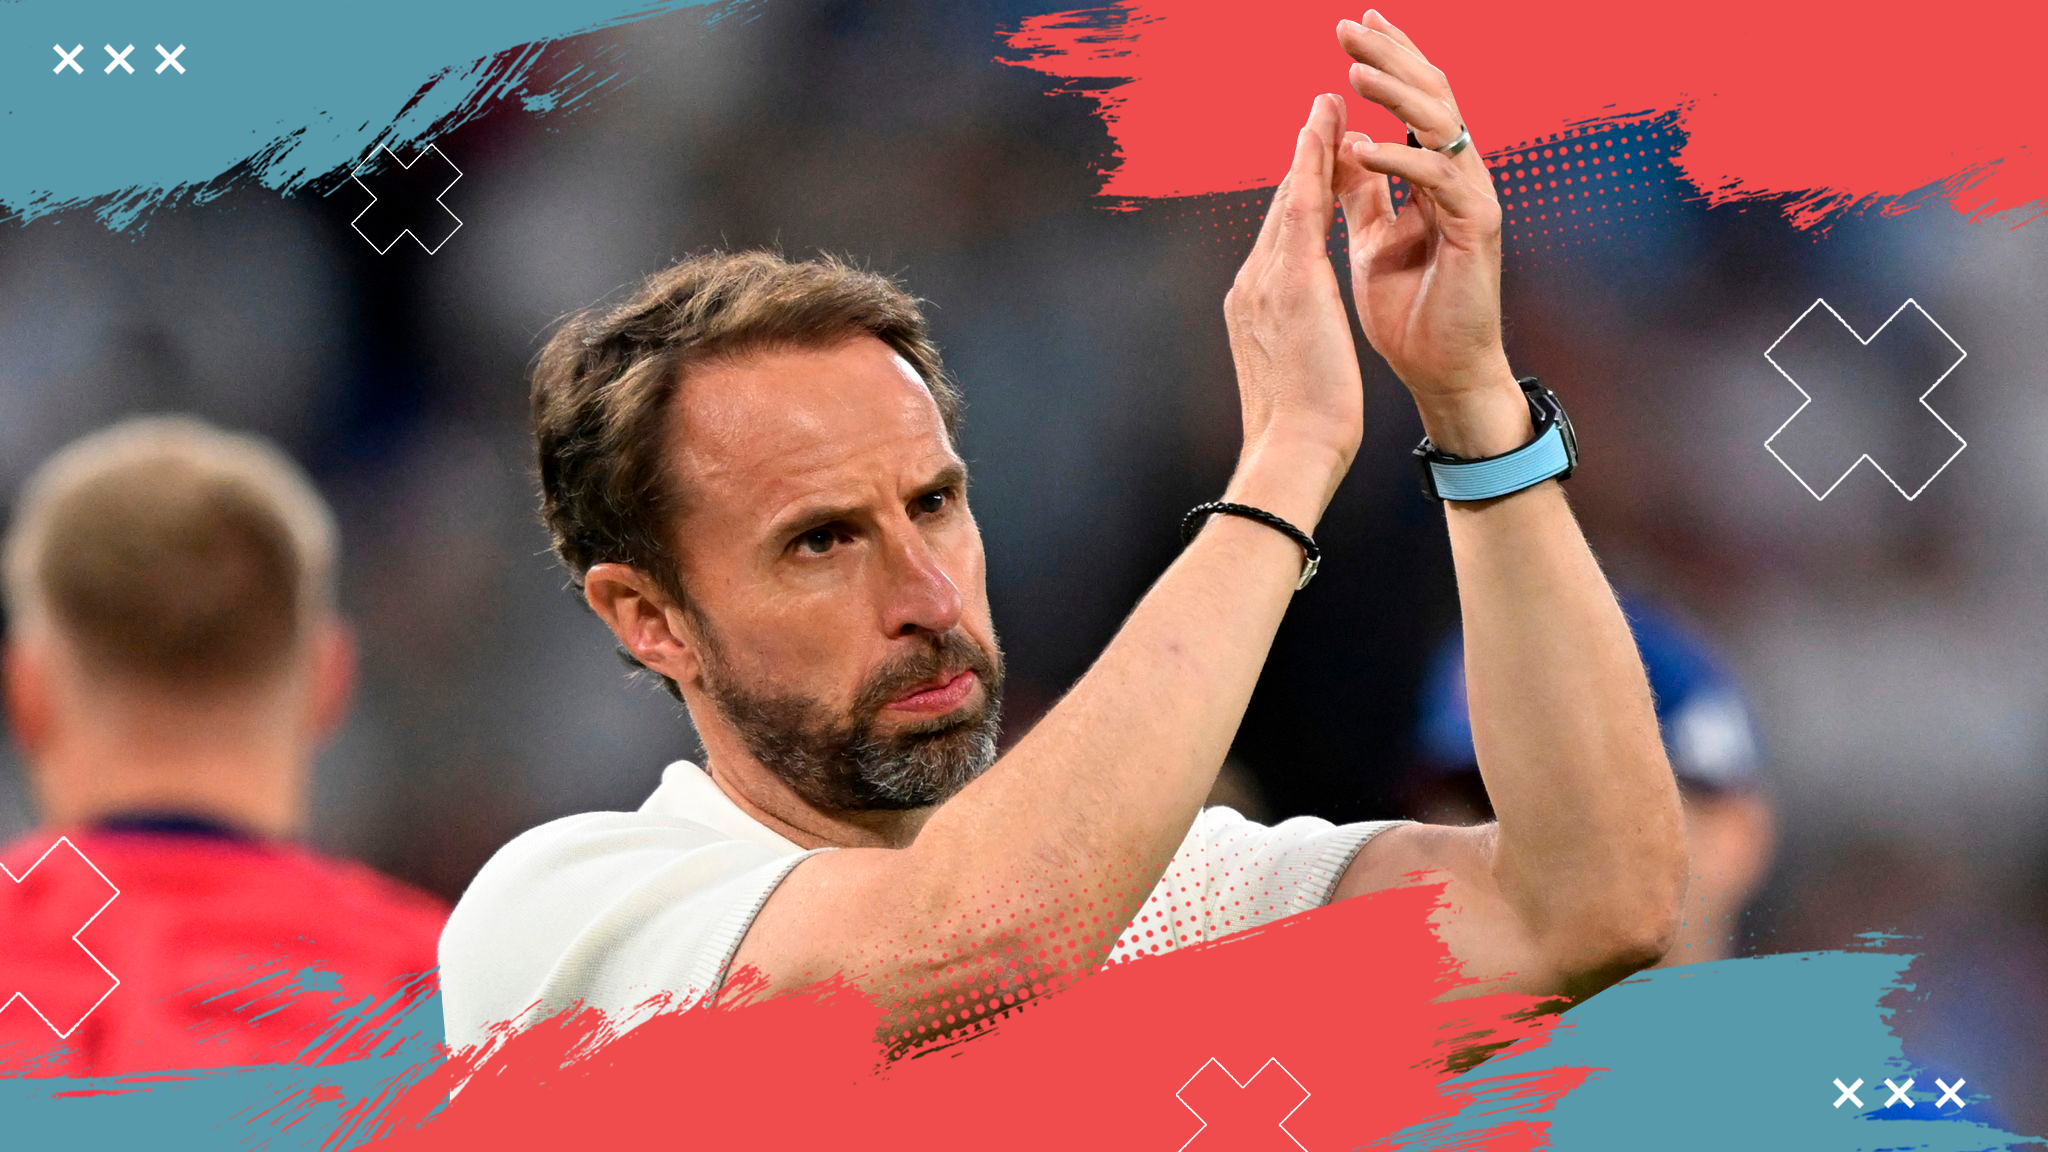 Gareth Southgate Steps Down: Who Will Be England’s Next Head Coach?